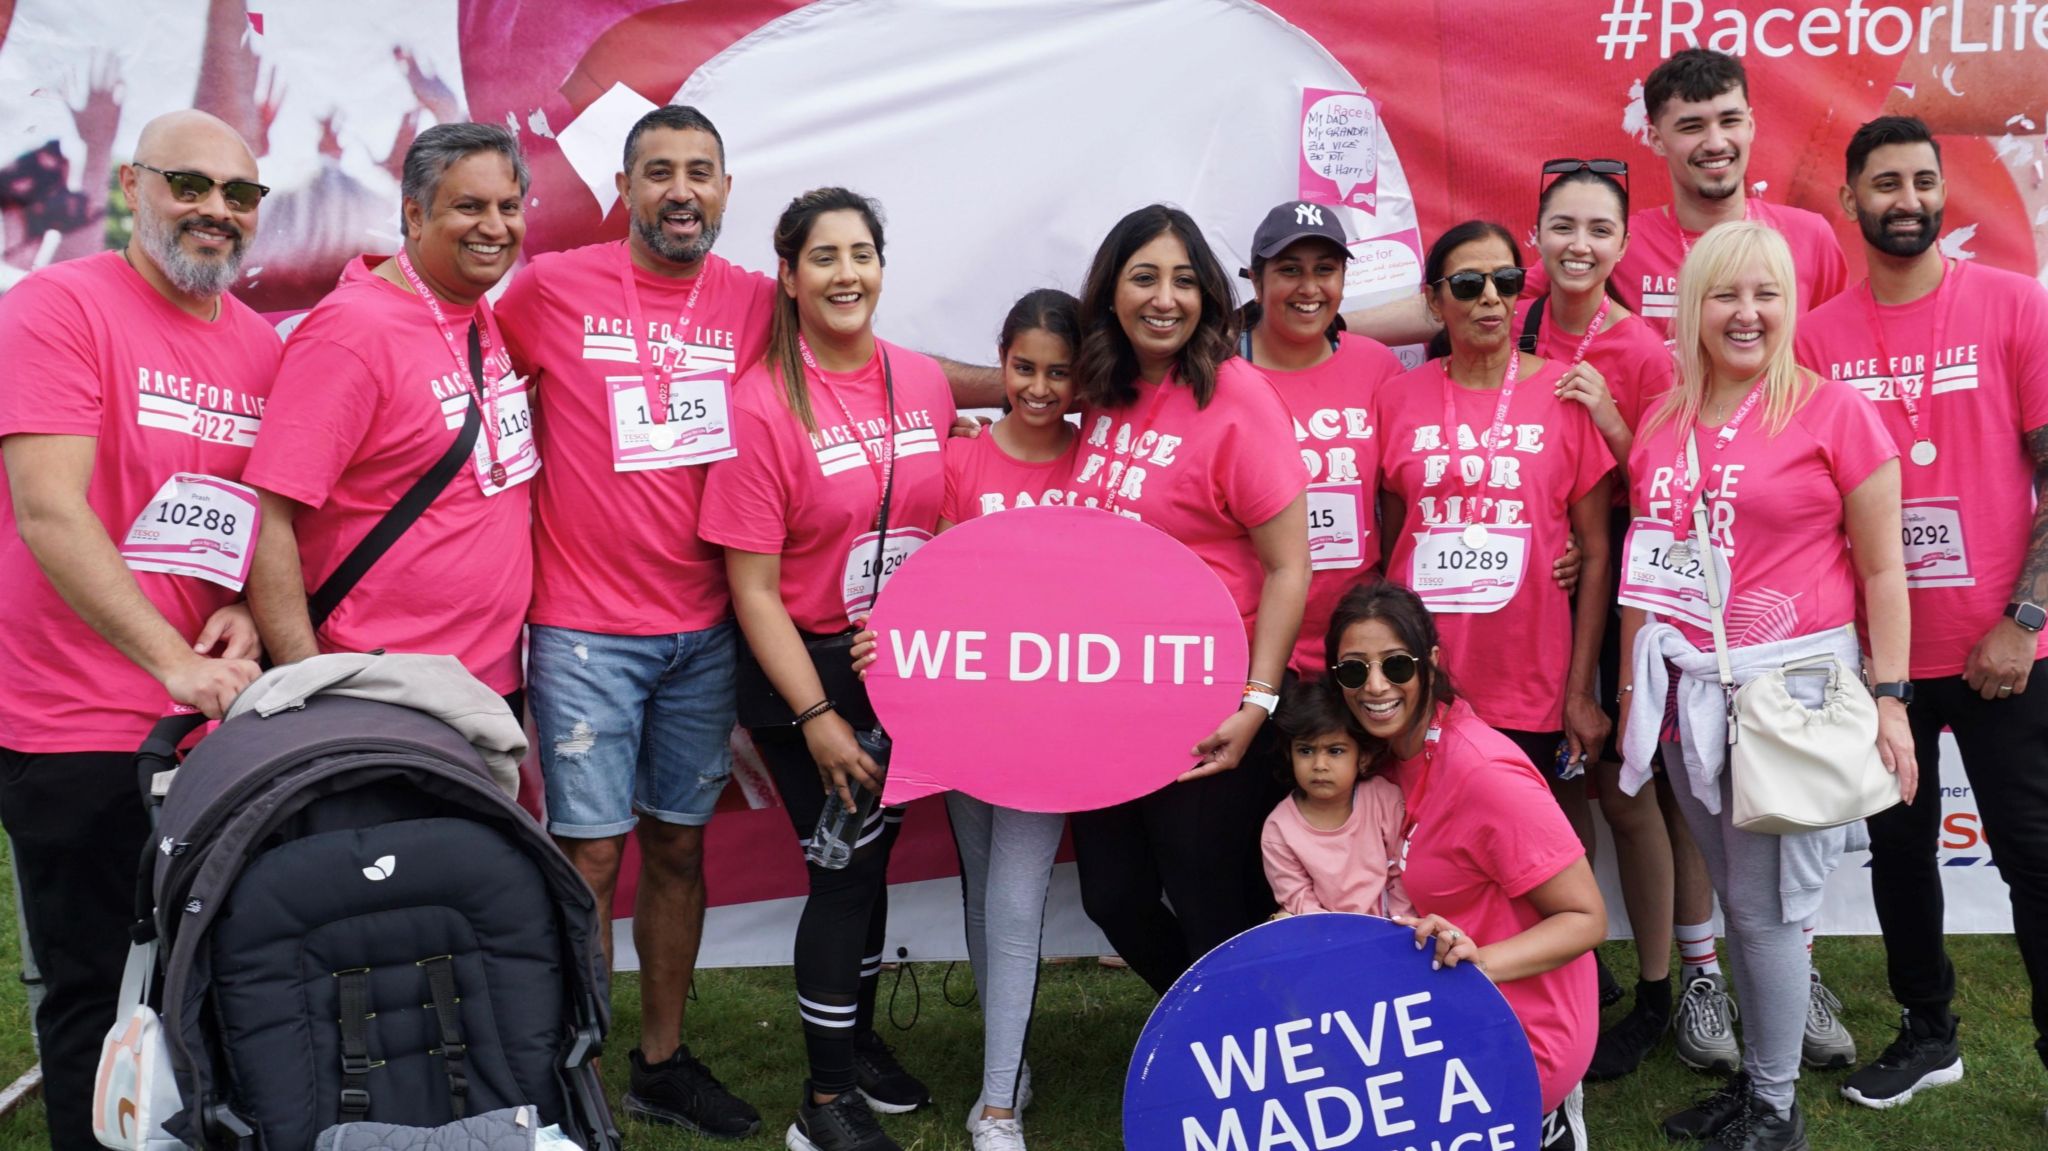 Minnal Ladva and family members at 2022 Race for Life in Watford